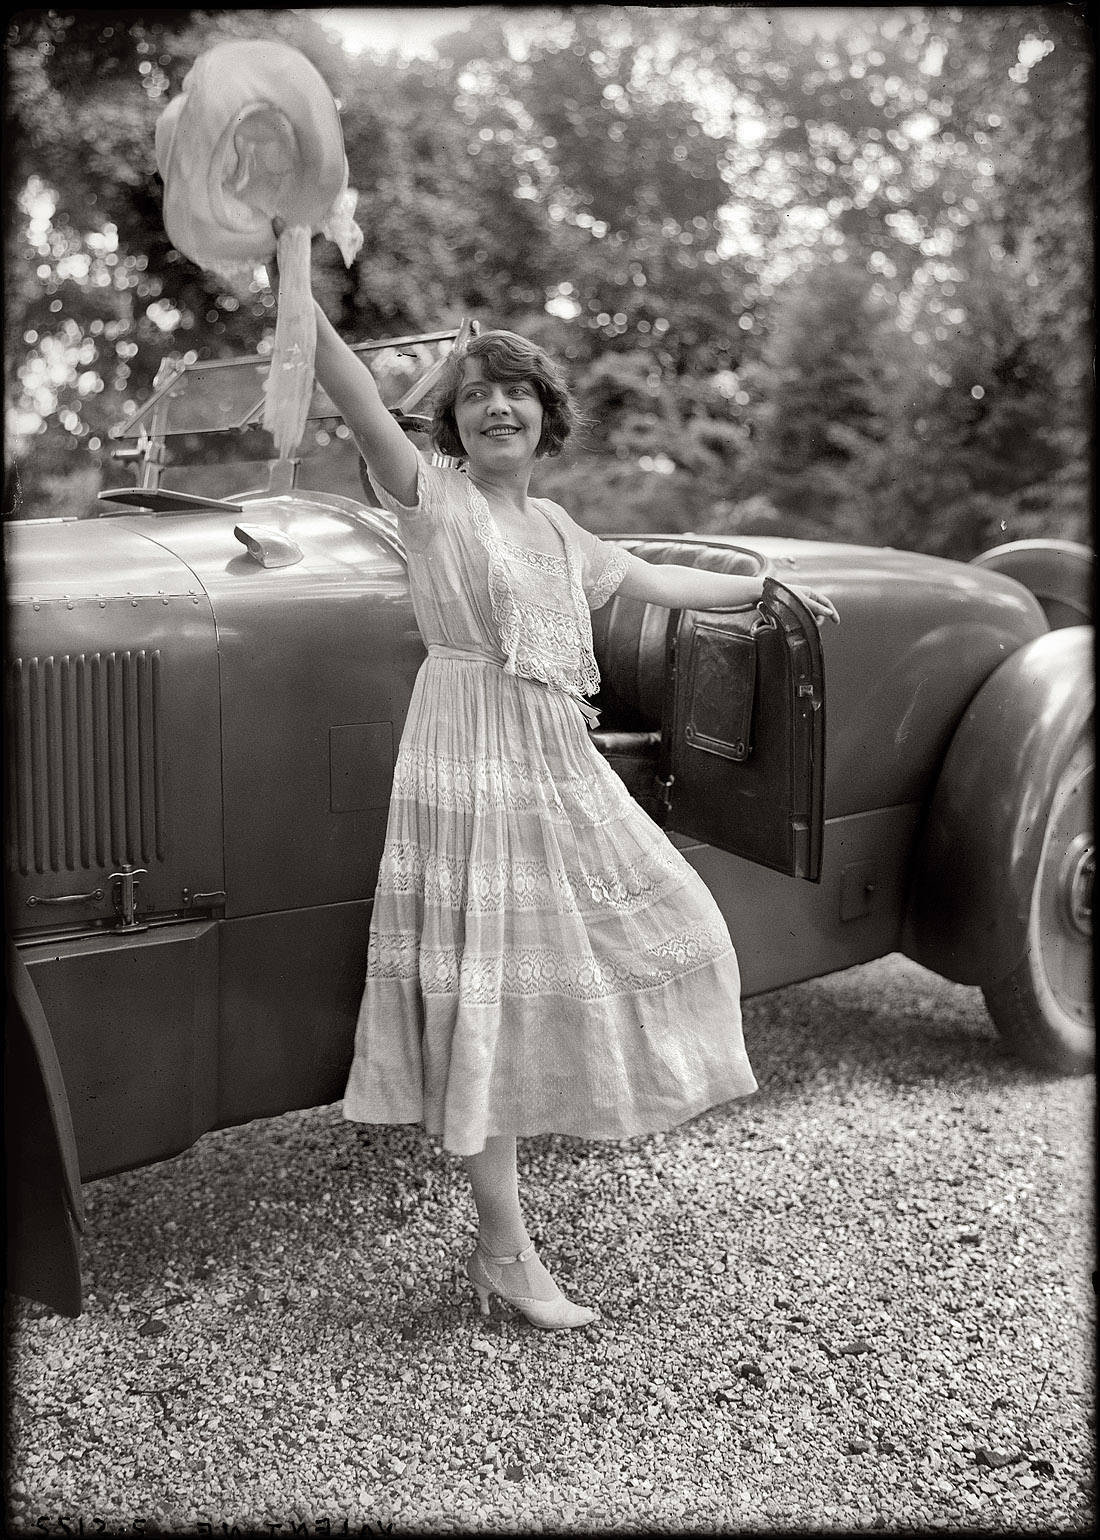 Another circa 1920 shot of the stage and film actress Grace Valentine and that Packard Twin Six roadster. Starting in 1916, Grace was one of the players in a Vitagraph film serial called The Scarlet Runner, about young Christopher Race and his "super car," the Scarlet Runner. (The final installment of the 12 two-reel episodes was "The Car and the Girl.") While unfortunately no prints of the film are known to survive, the story still exists on paper, having been serialized in newspapers of the day. View full size. George Grantham Bain Collection.